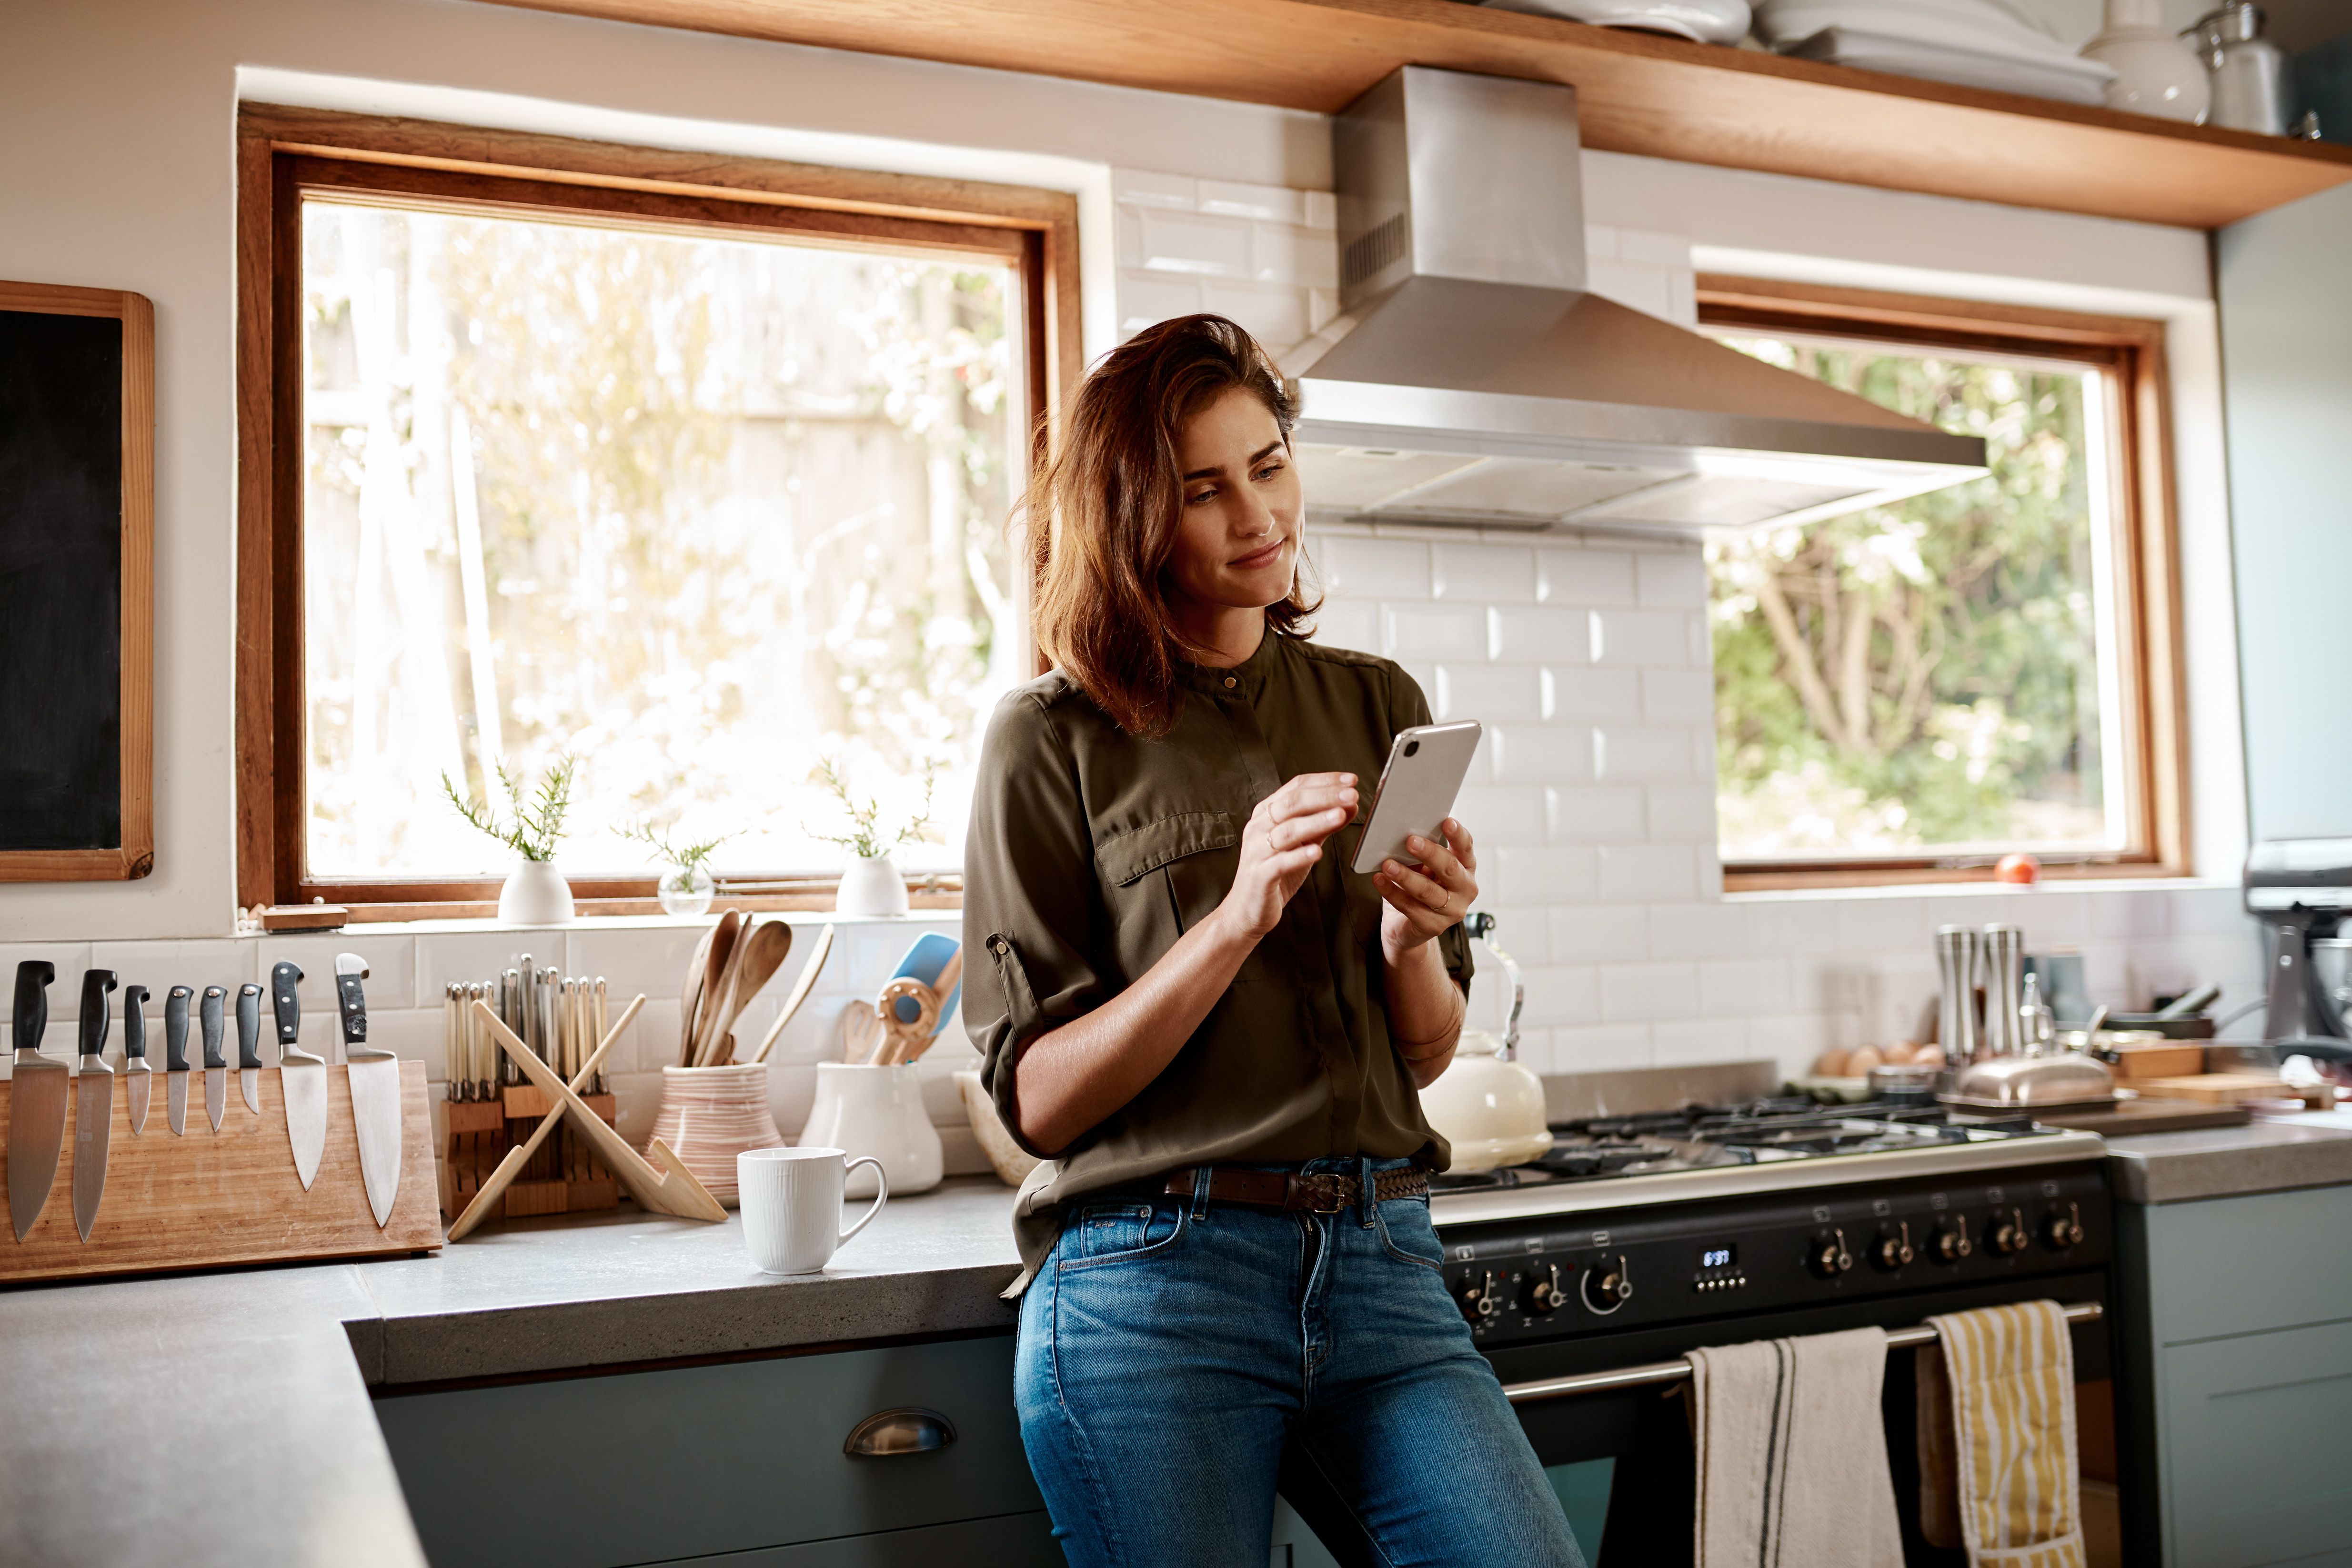 A person stands in their kitchen looking at their mobile device.